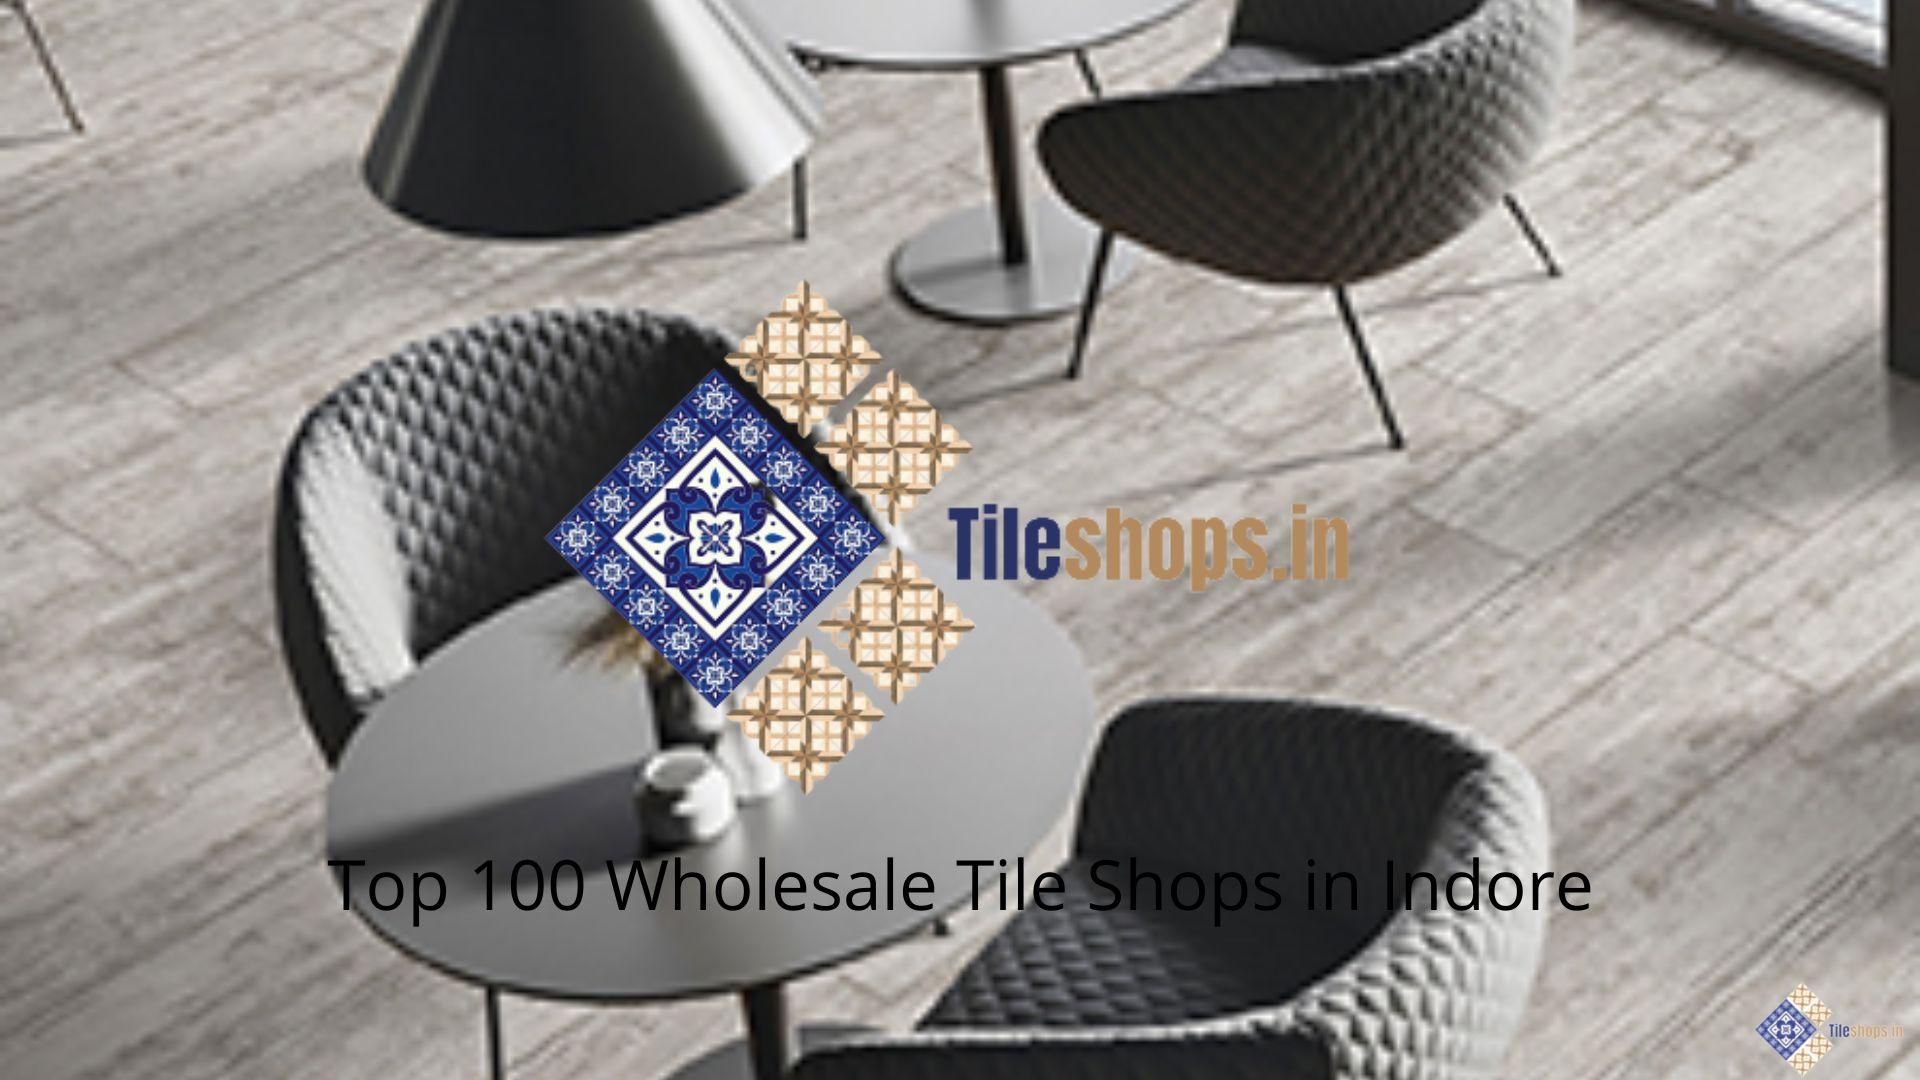 Top 100 Wholesale Tile Shops in Indore